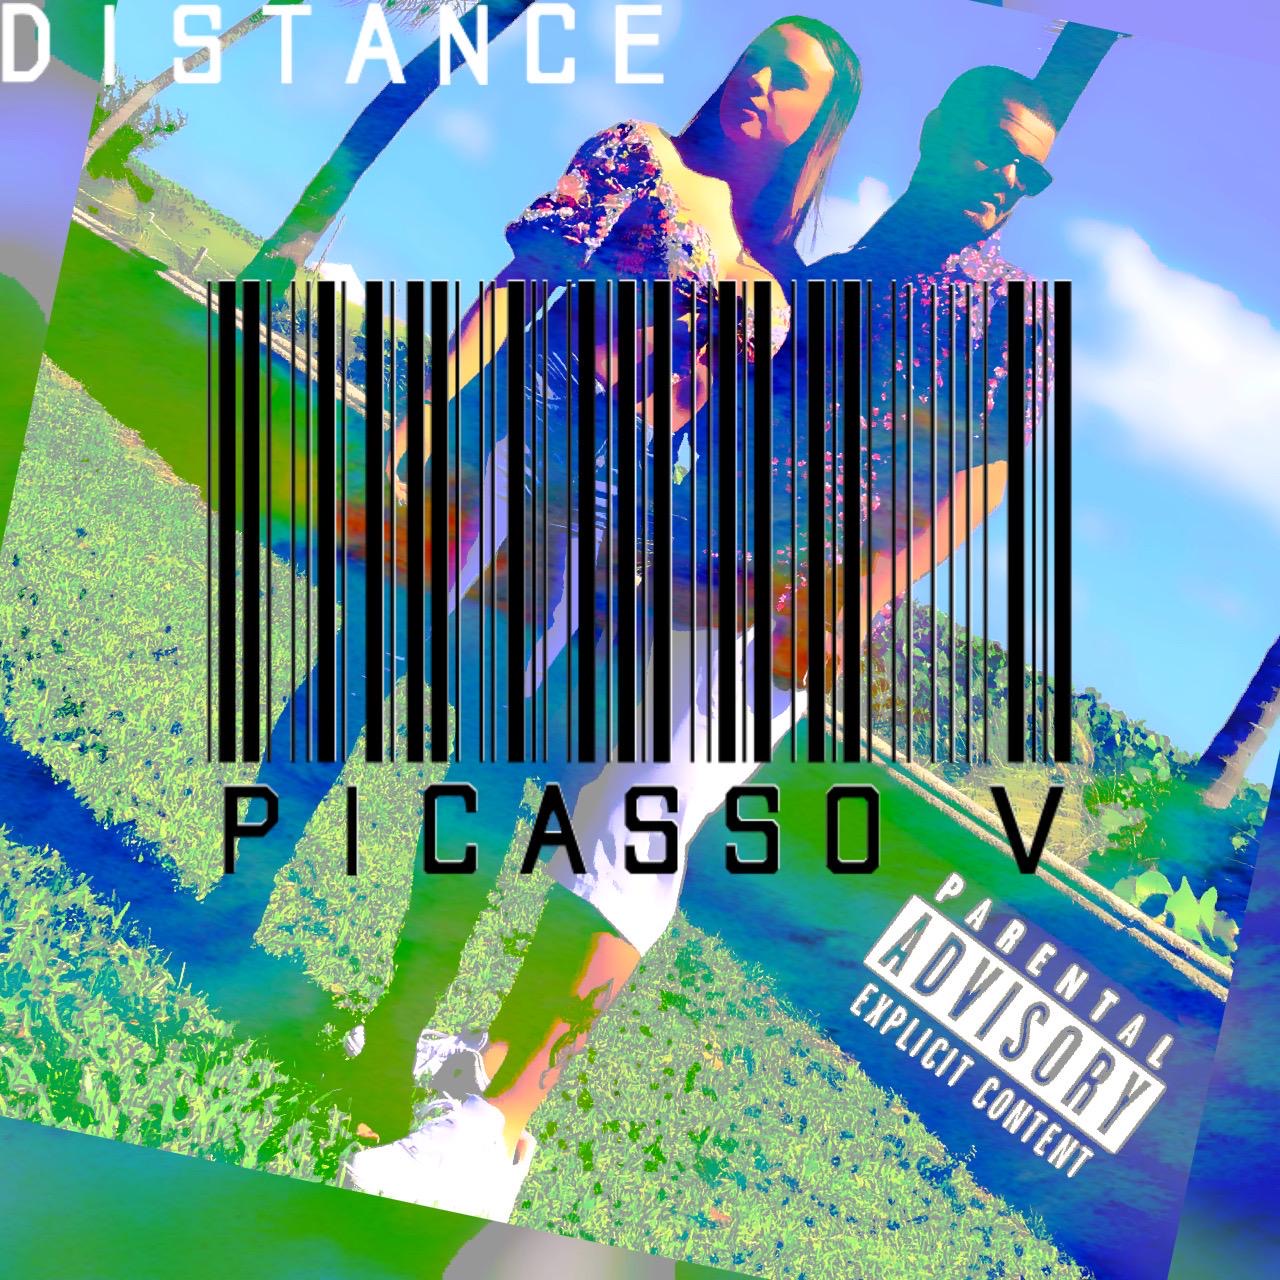 [Video] Picasso V ‘Distance’